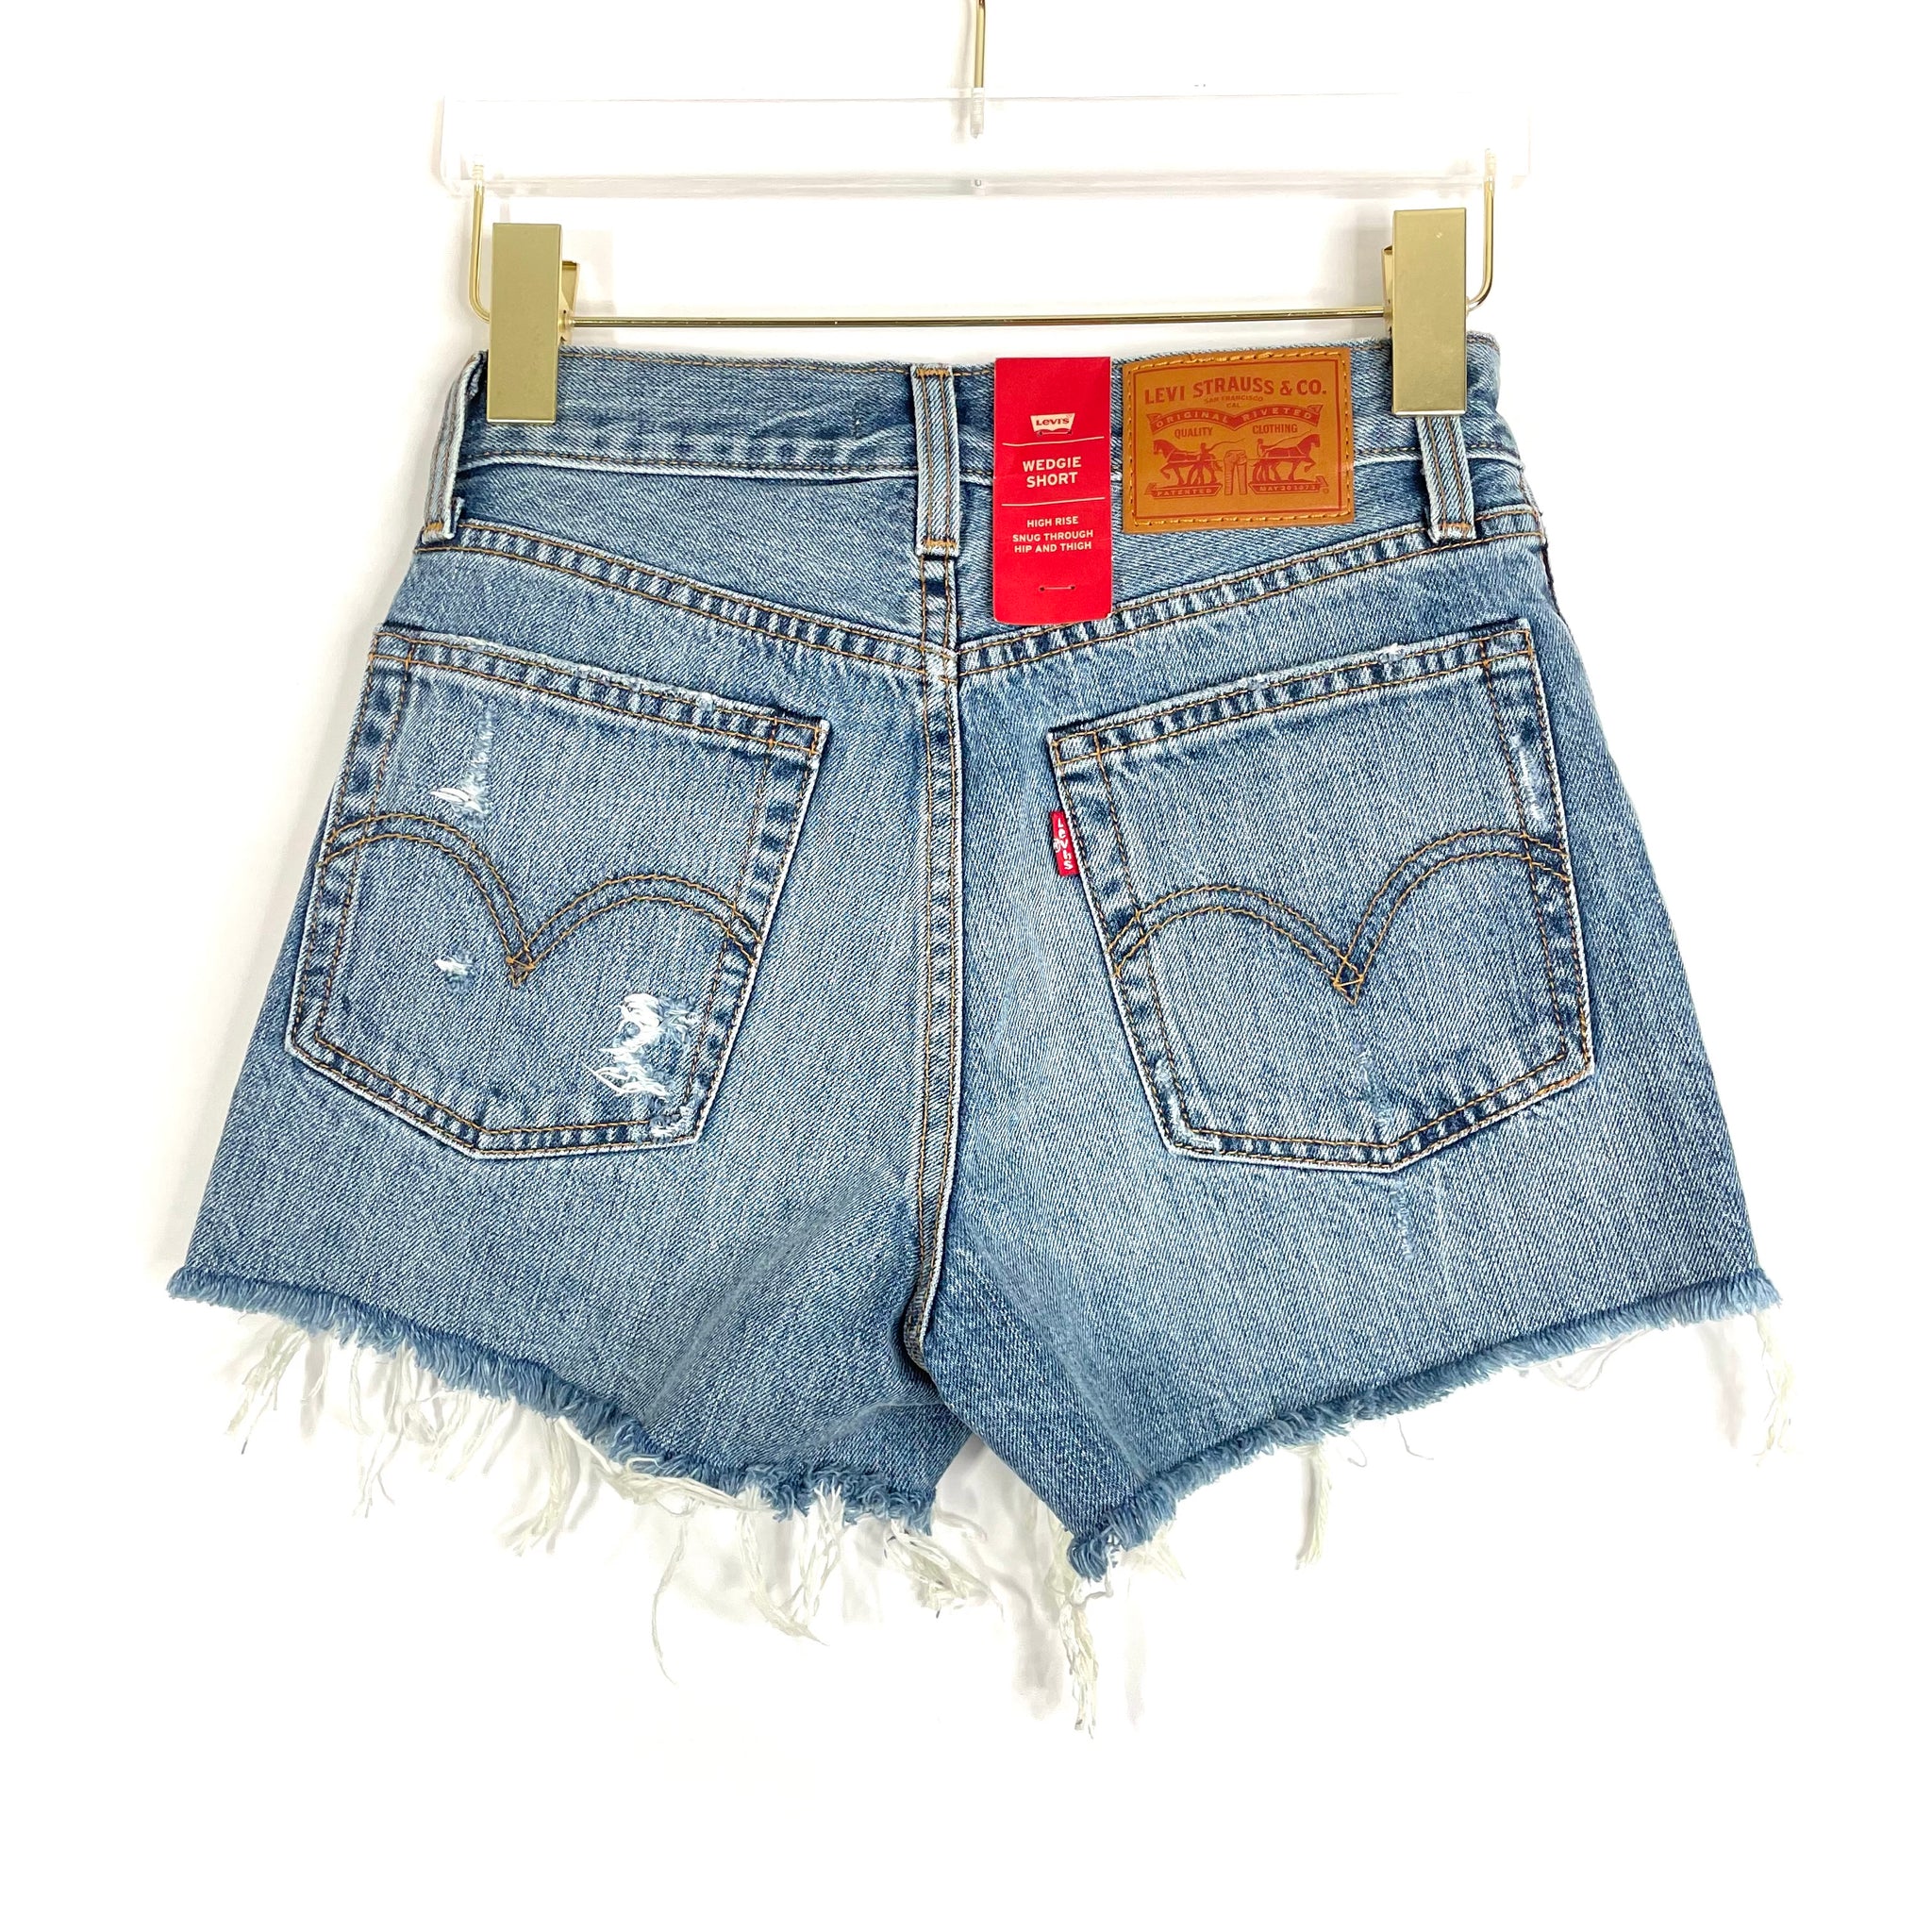 Levi's Premium Wedgie Jean Shorts in Blue Your Mind – Farewell Exchange